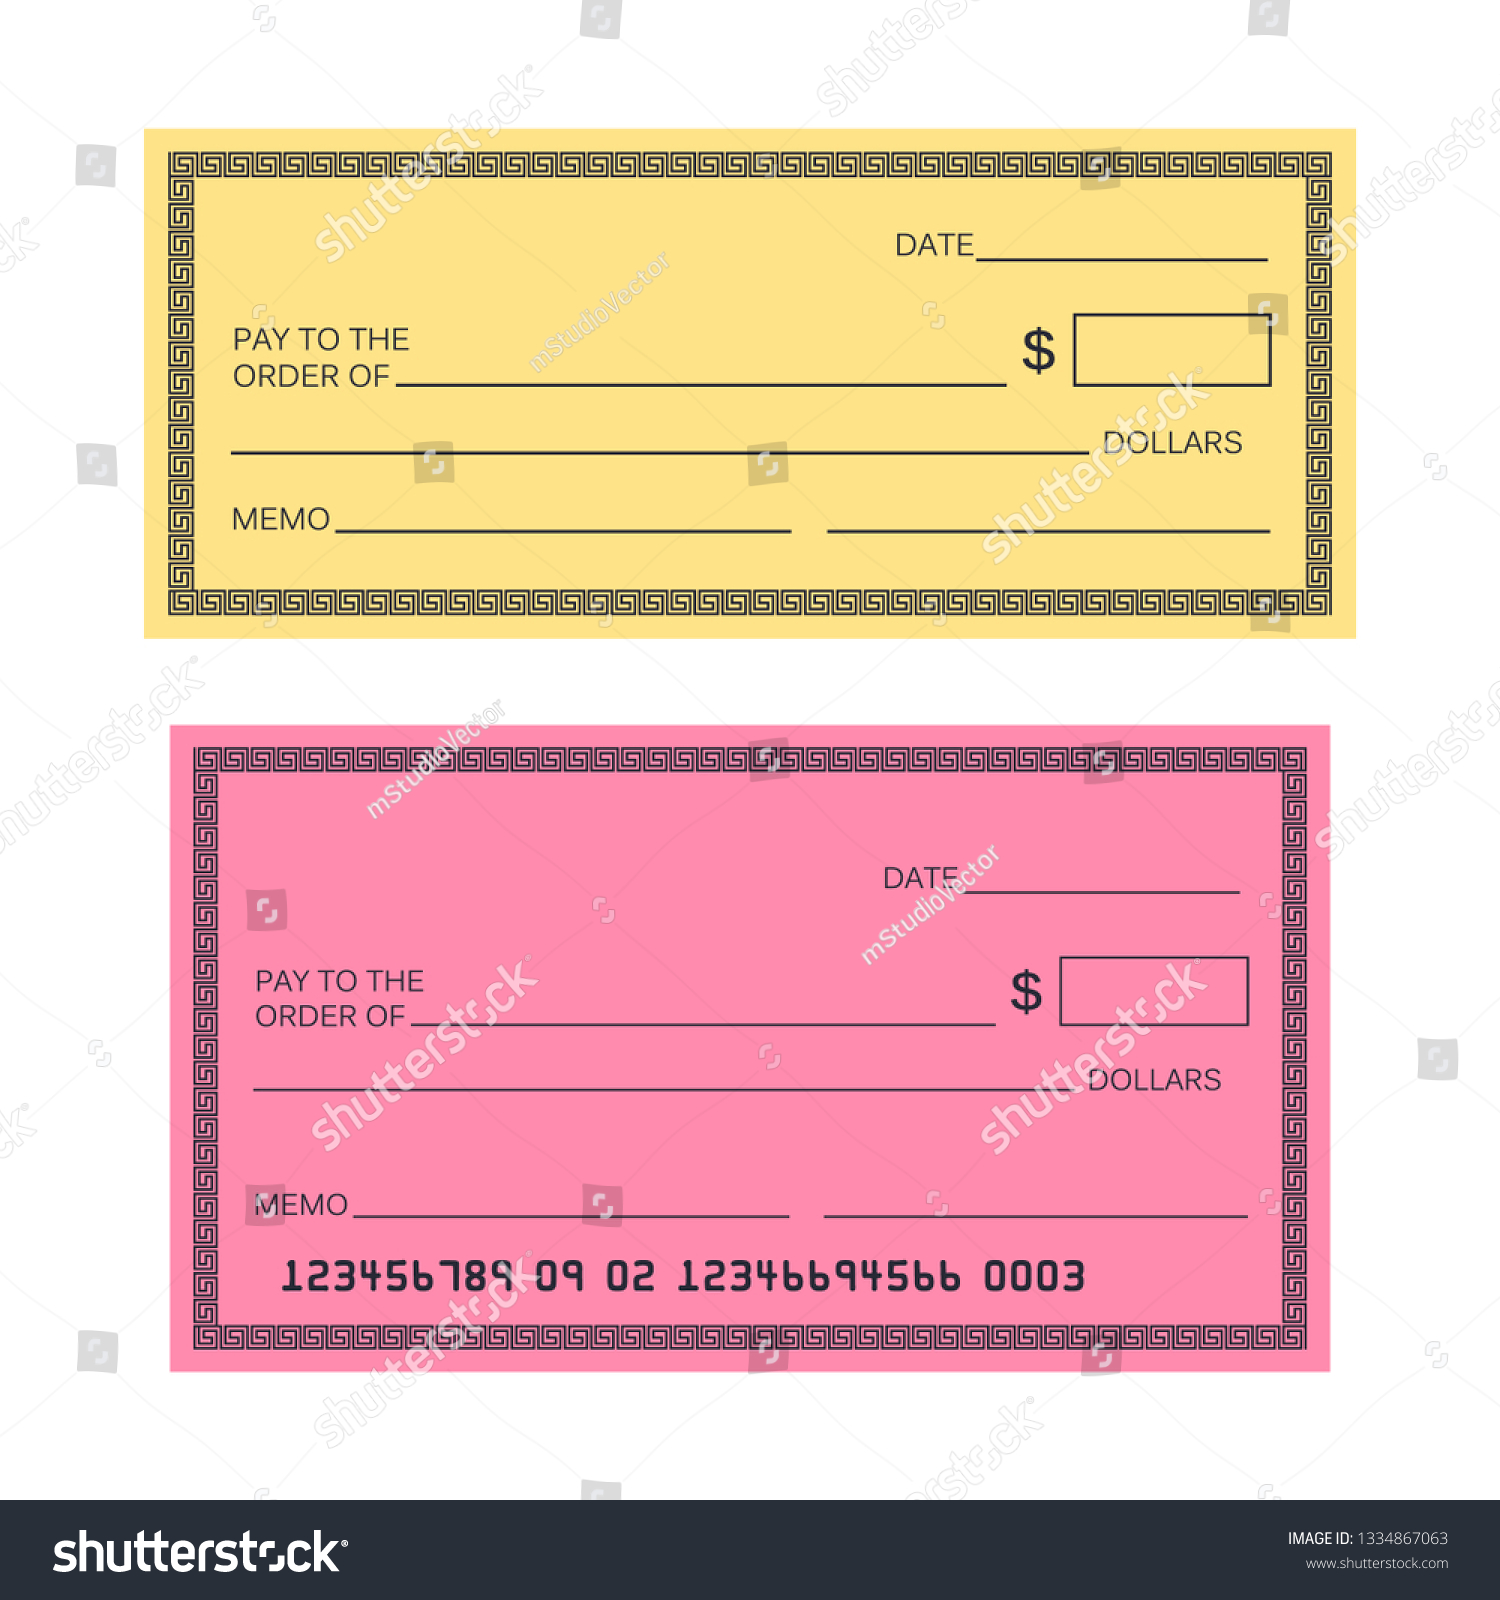 blank-check-template-check-template-banking-stock-illustration